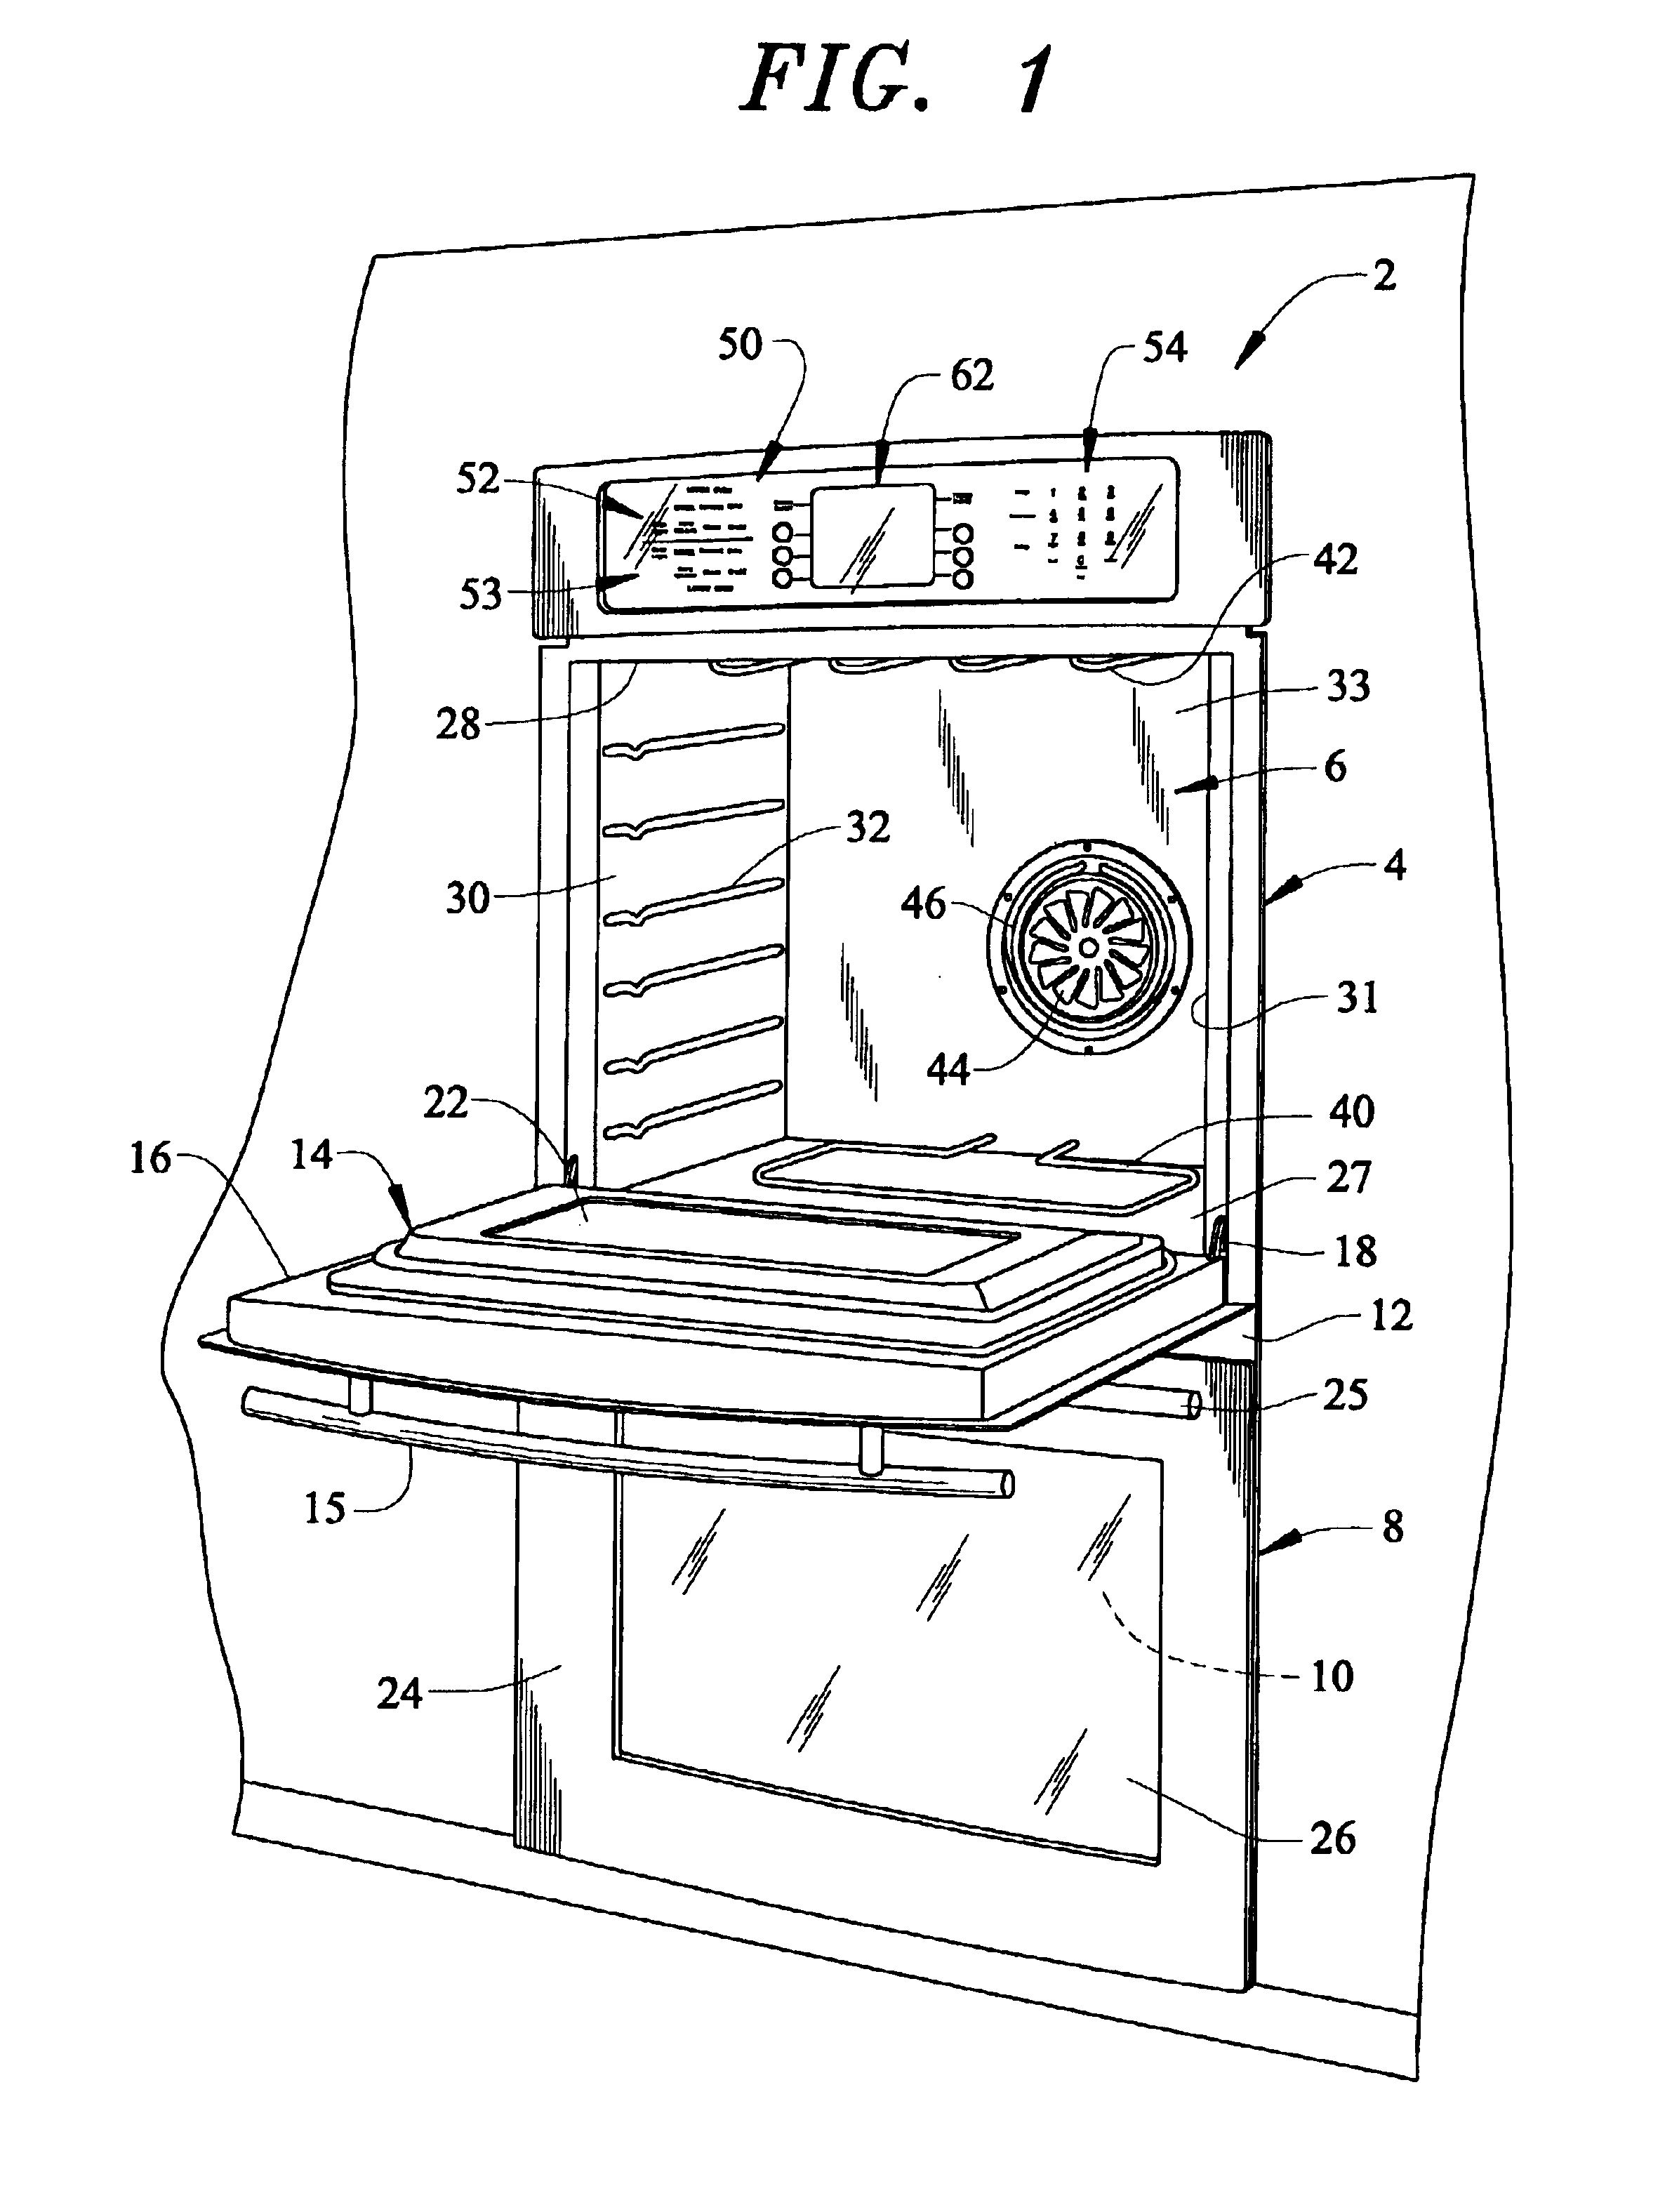 Menu driven control system for a cooking appliance